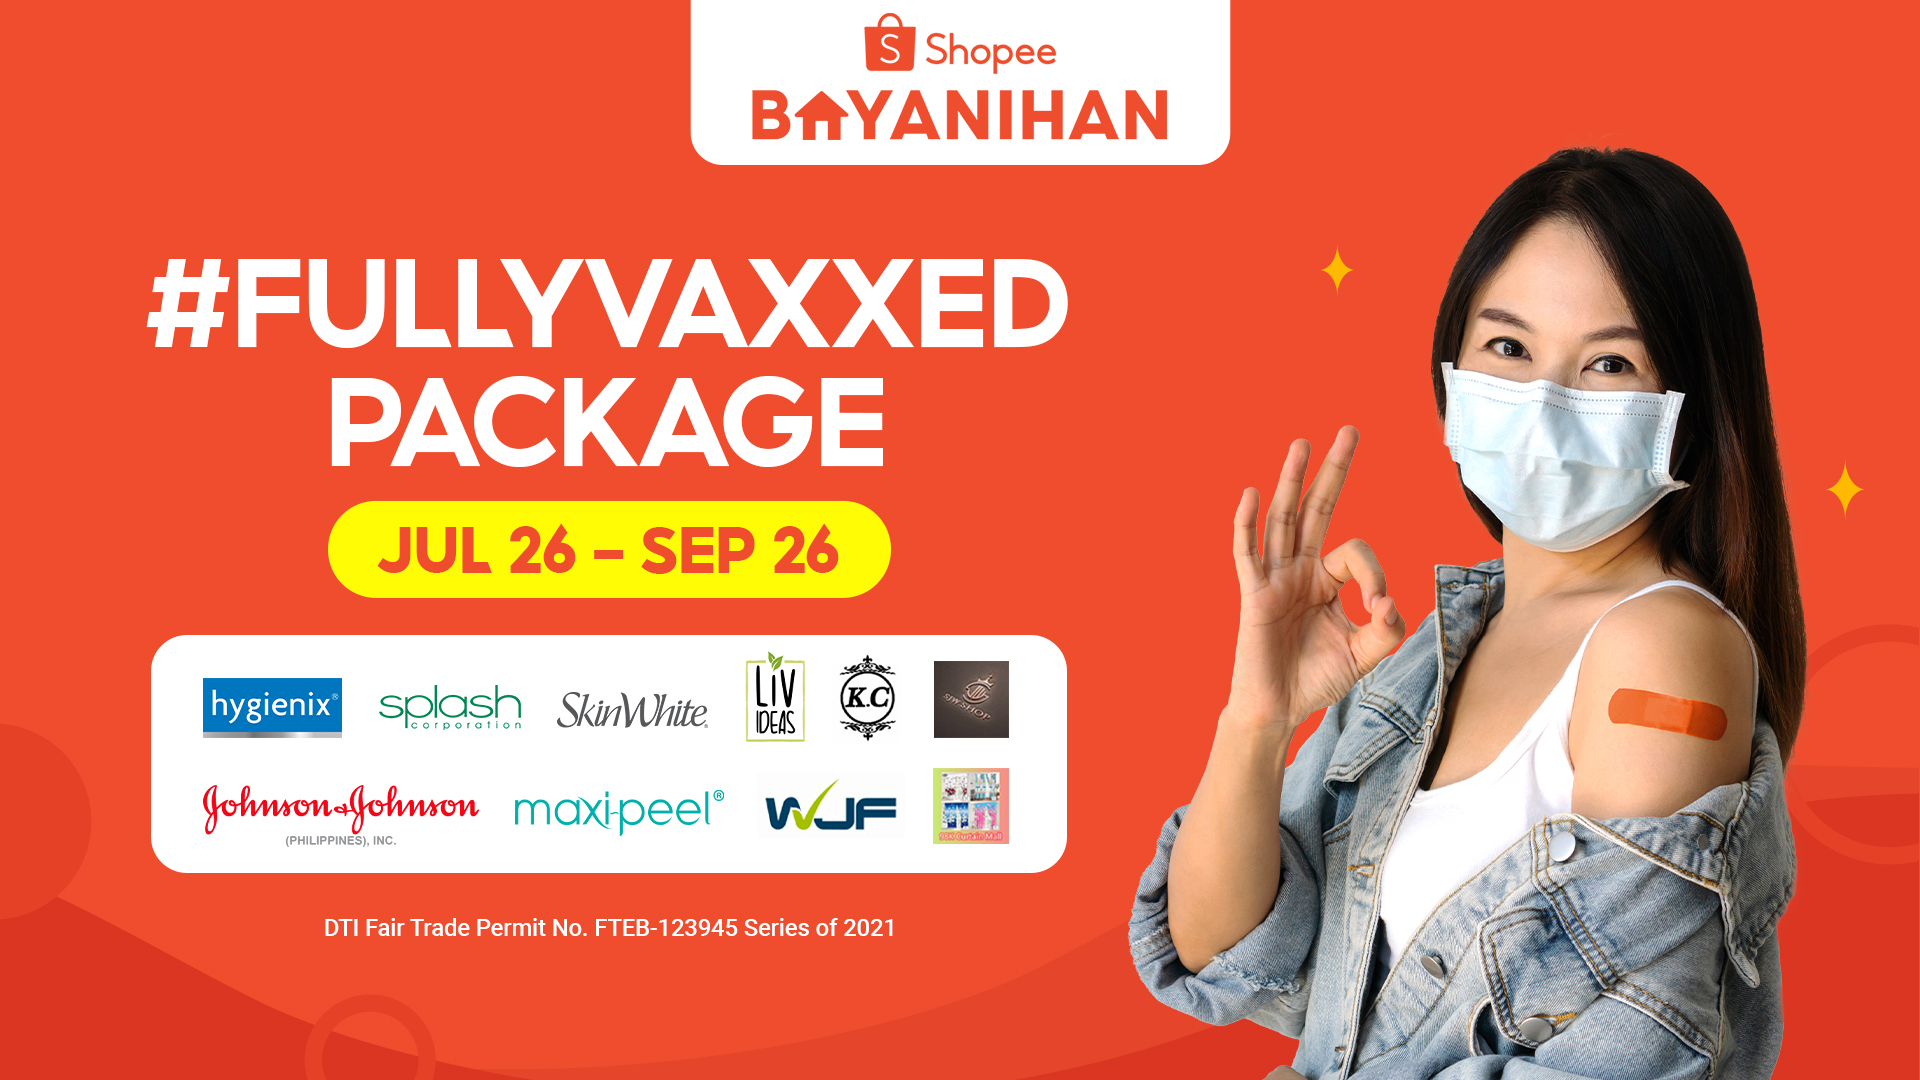 shopee-offers-users-fullyvaxxed-package-to-encourage-filipinos-to-get-vaccinated